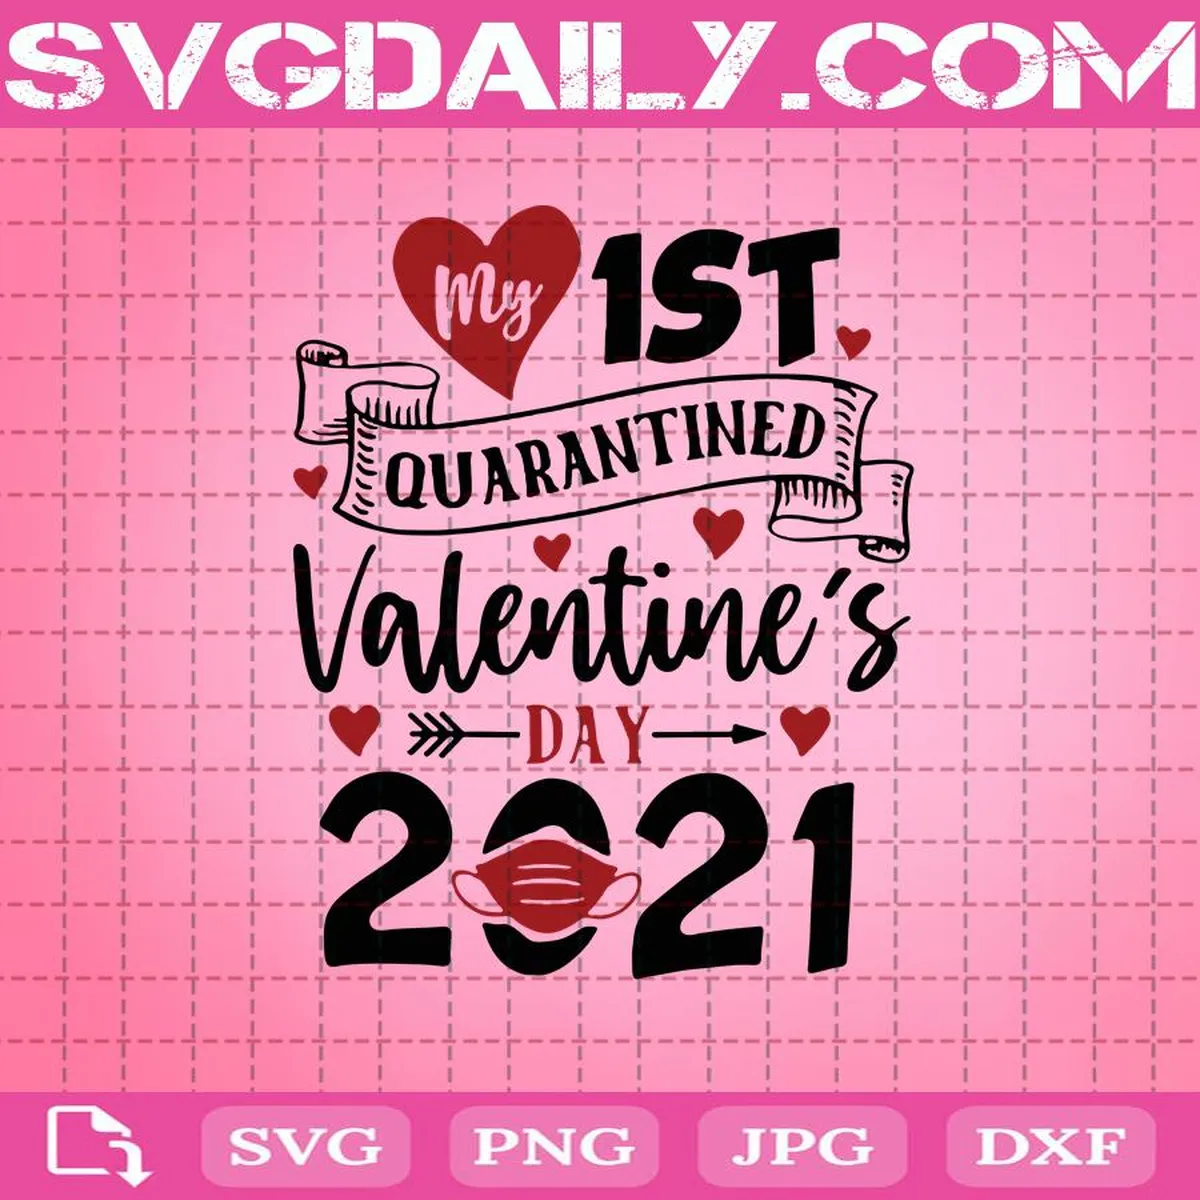 My 1St Quarantined Valentine’s Day 2021 Svg, So Cute Valentines Day Svg, Quarantined Svg, Valentines Gift Svg, Valentines Day Svg